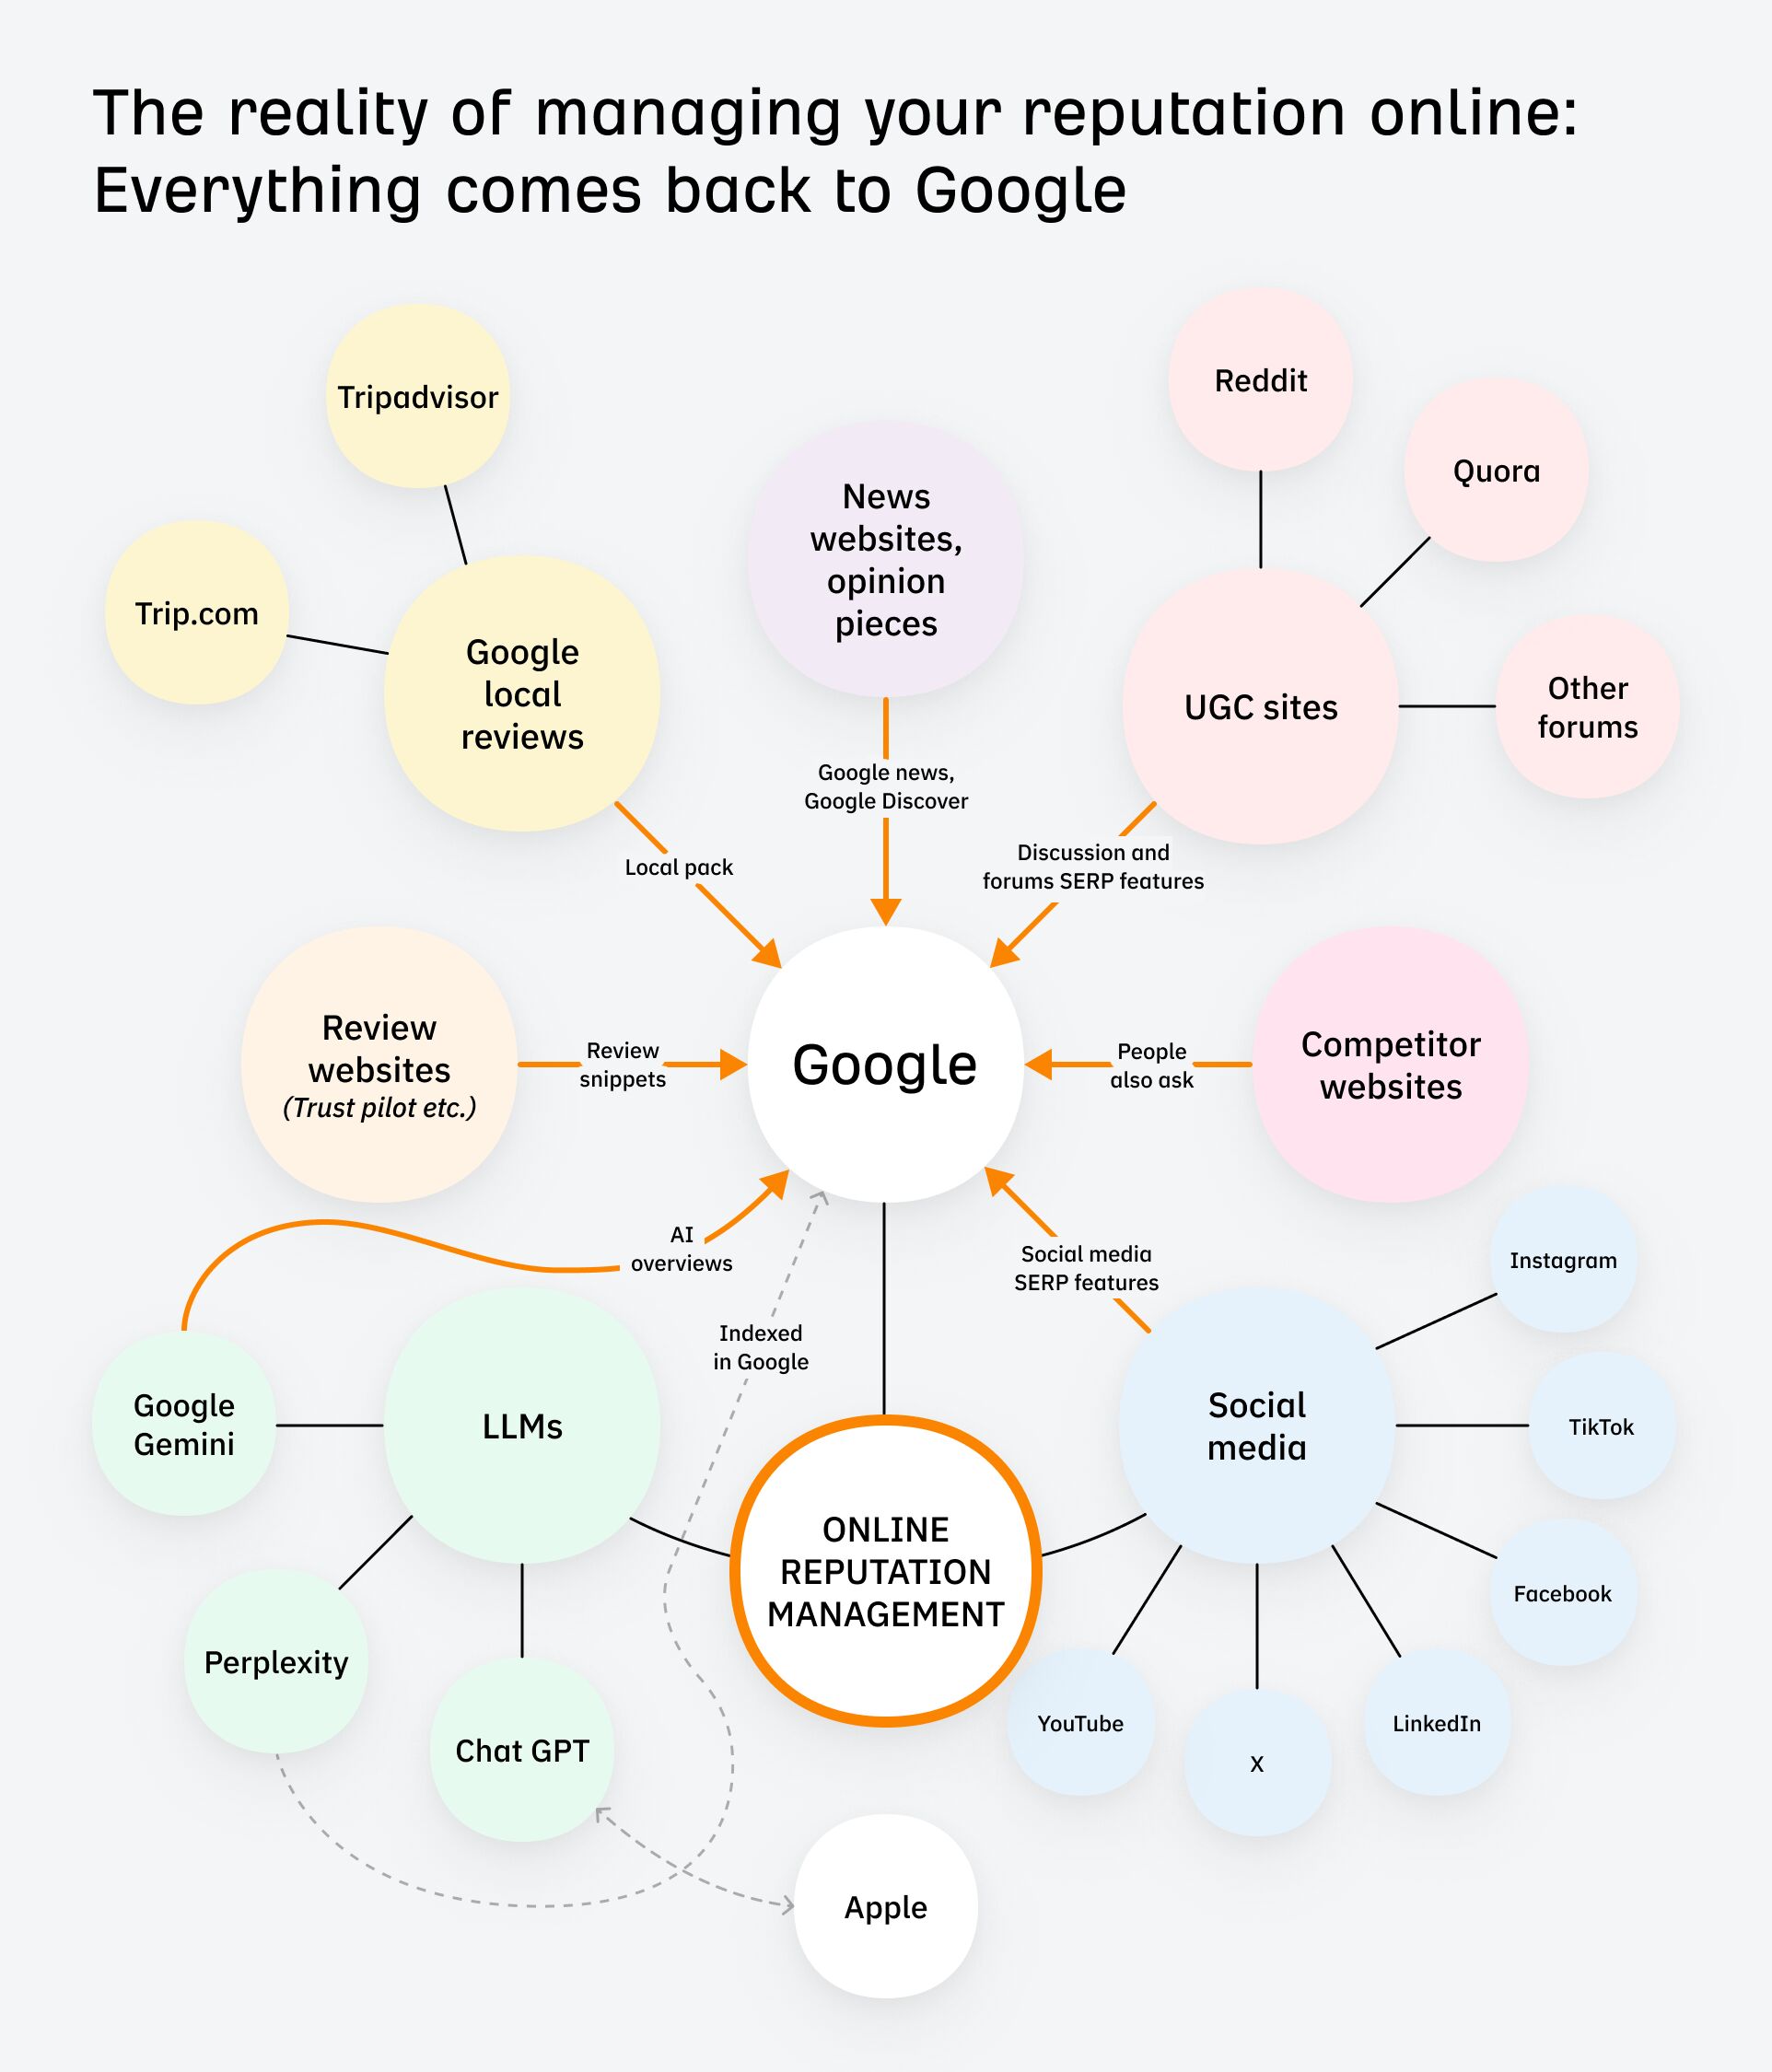 The reality of managing your reputation online: Everything comes back to Google